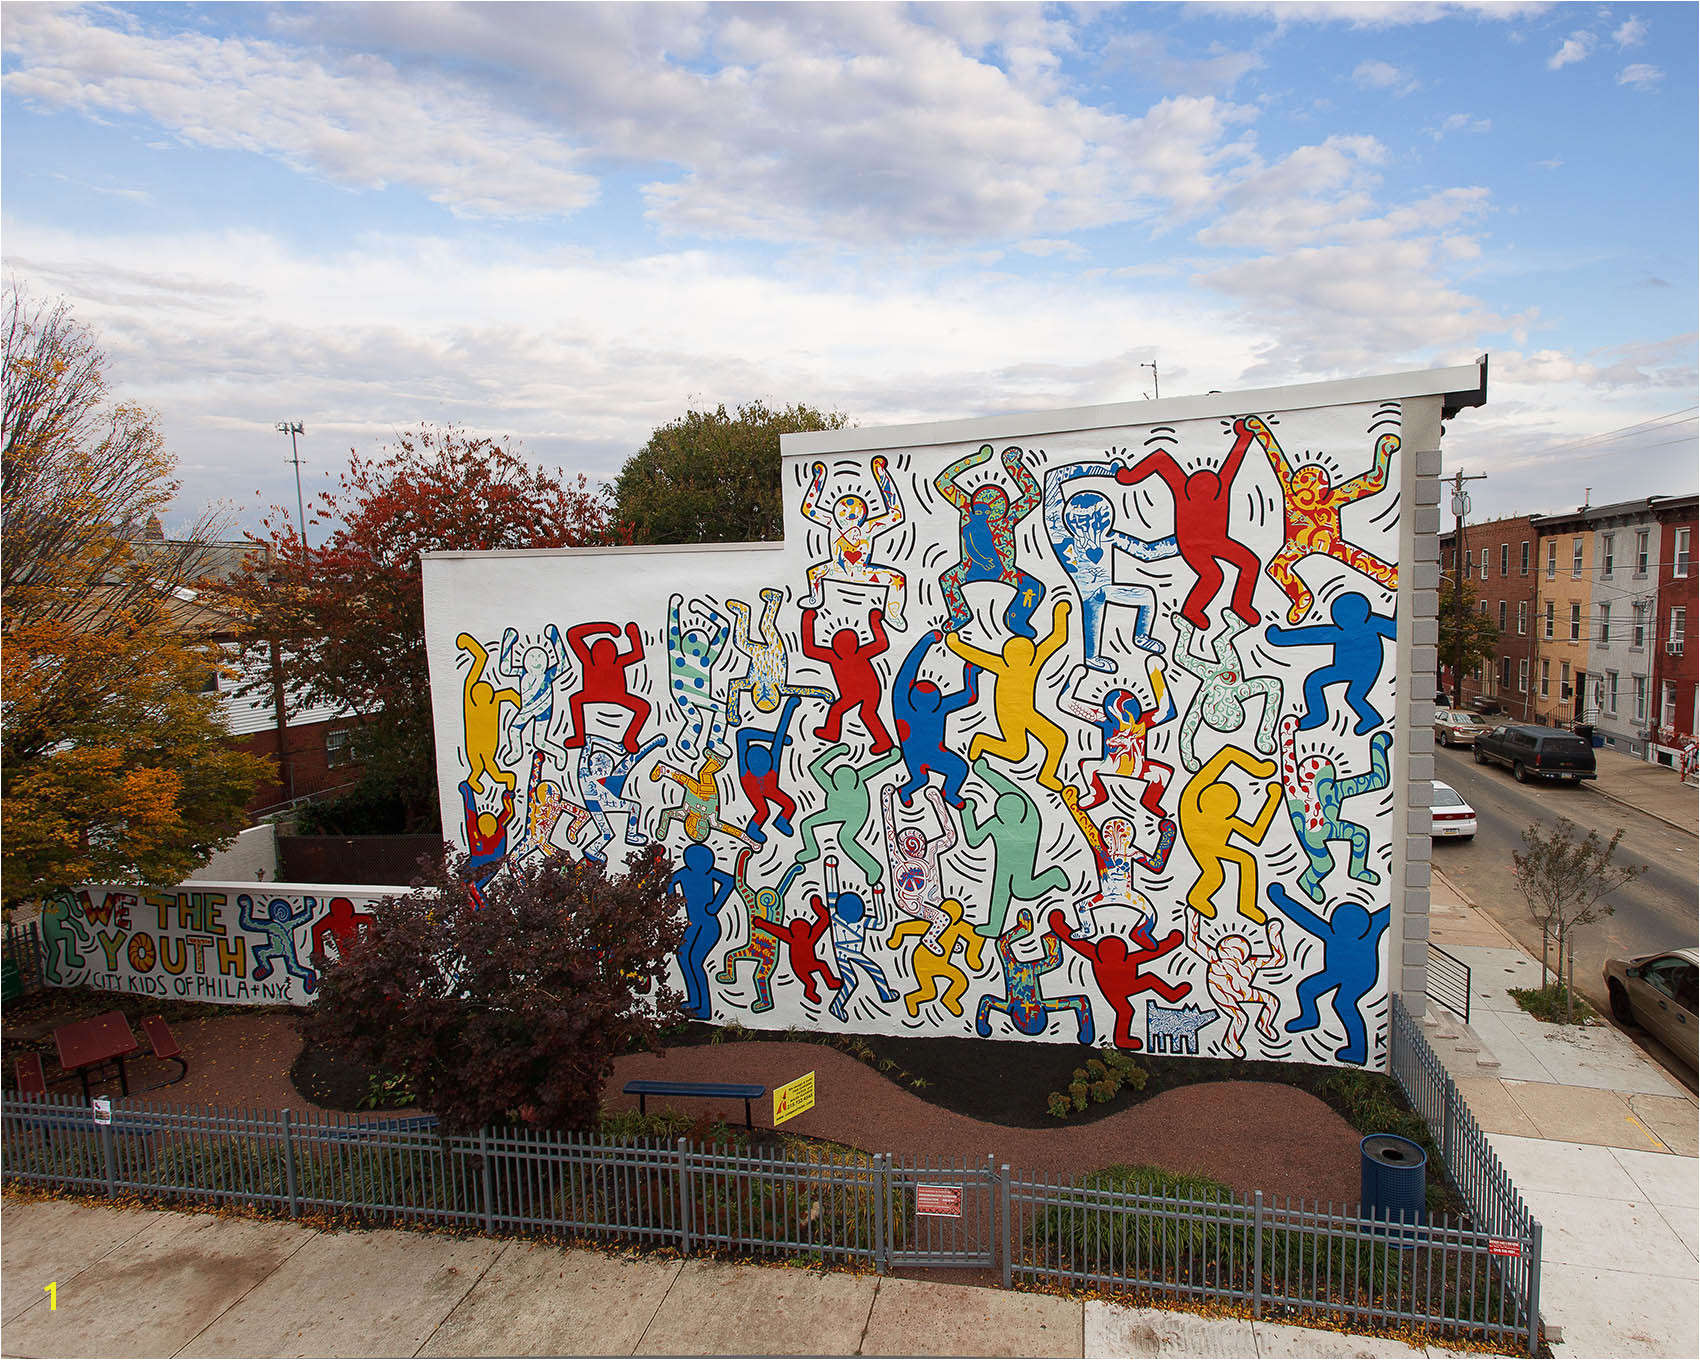 Originally created in 1987 We the Youth is the only Keith Haring collaborative public mural remaining intact and on its original site